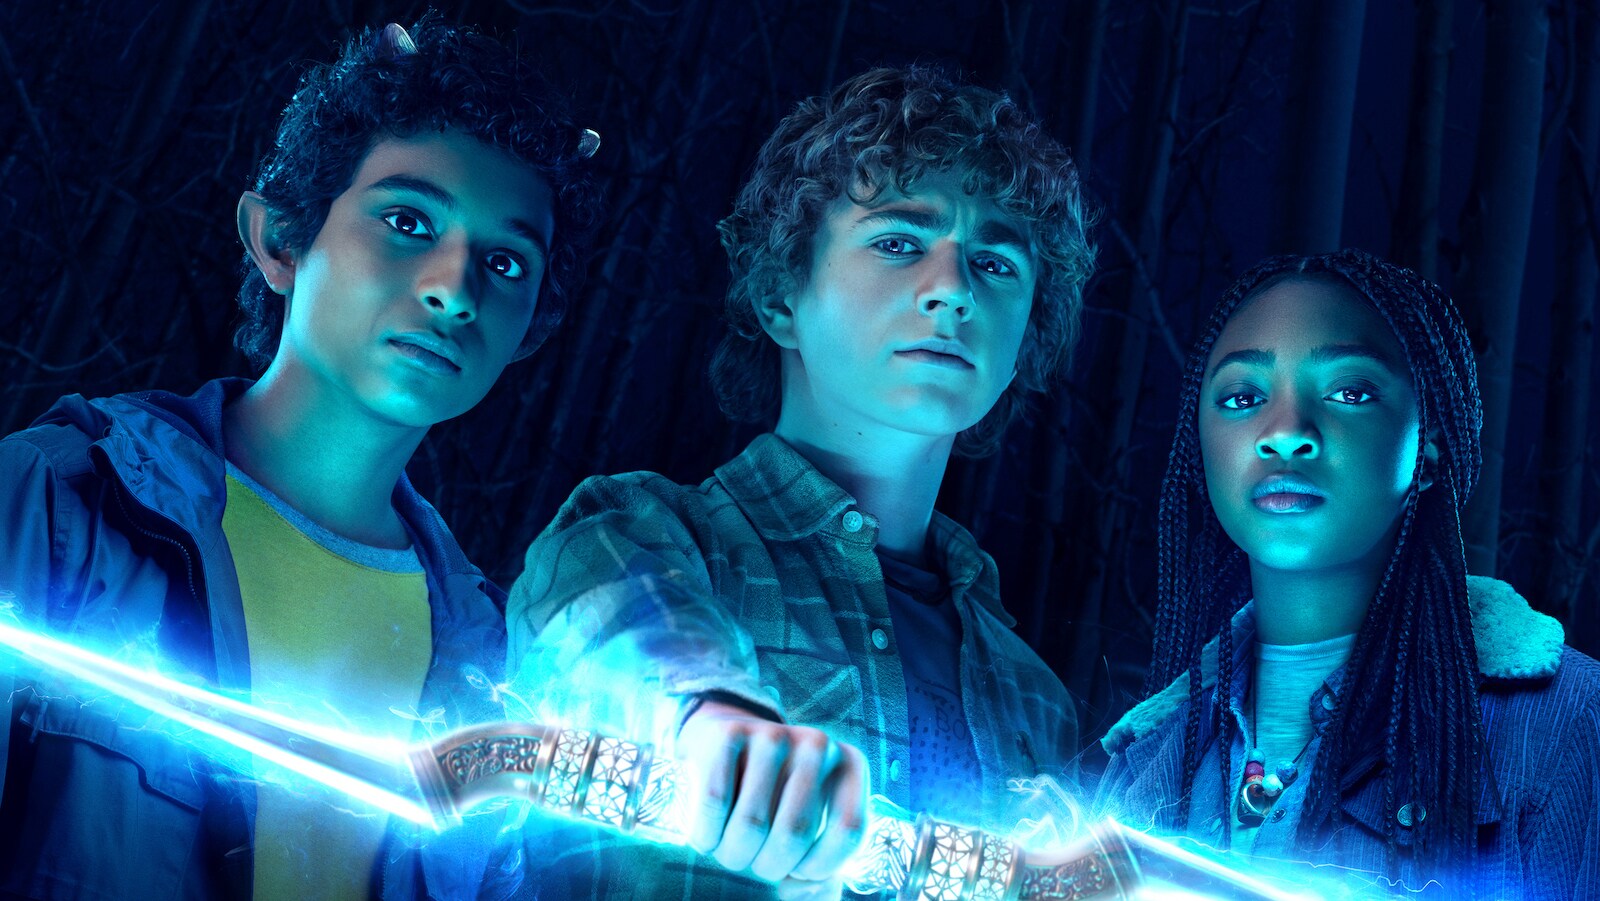 Percy Jackson Wallpaper - Apps on Google Play